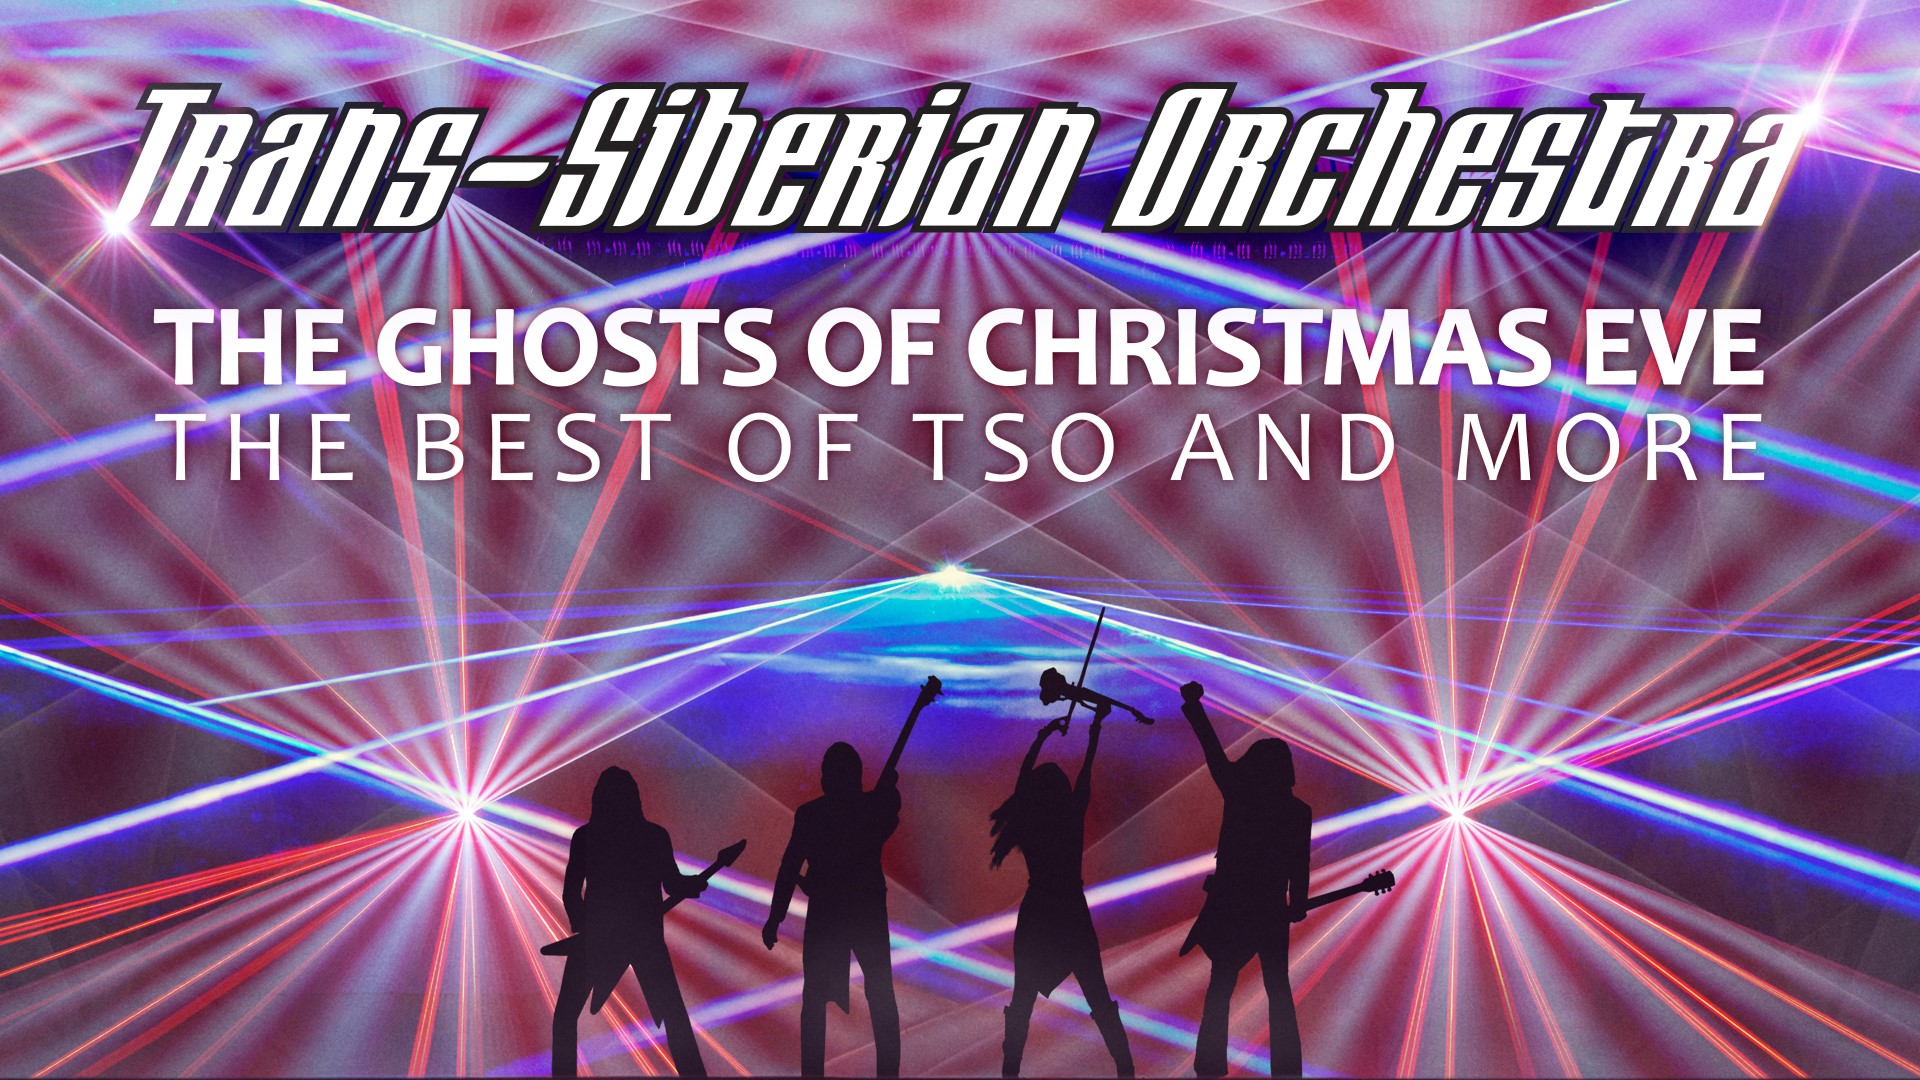 Mike The Intern talks with Al Pitrelli (TSO) about the Trans-Siberian Orchestra 2023 Tour!